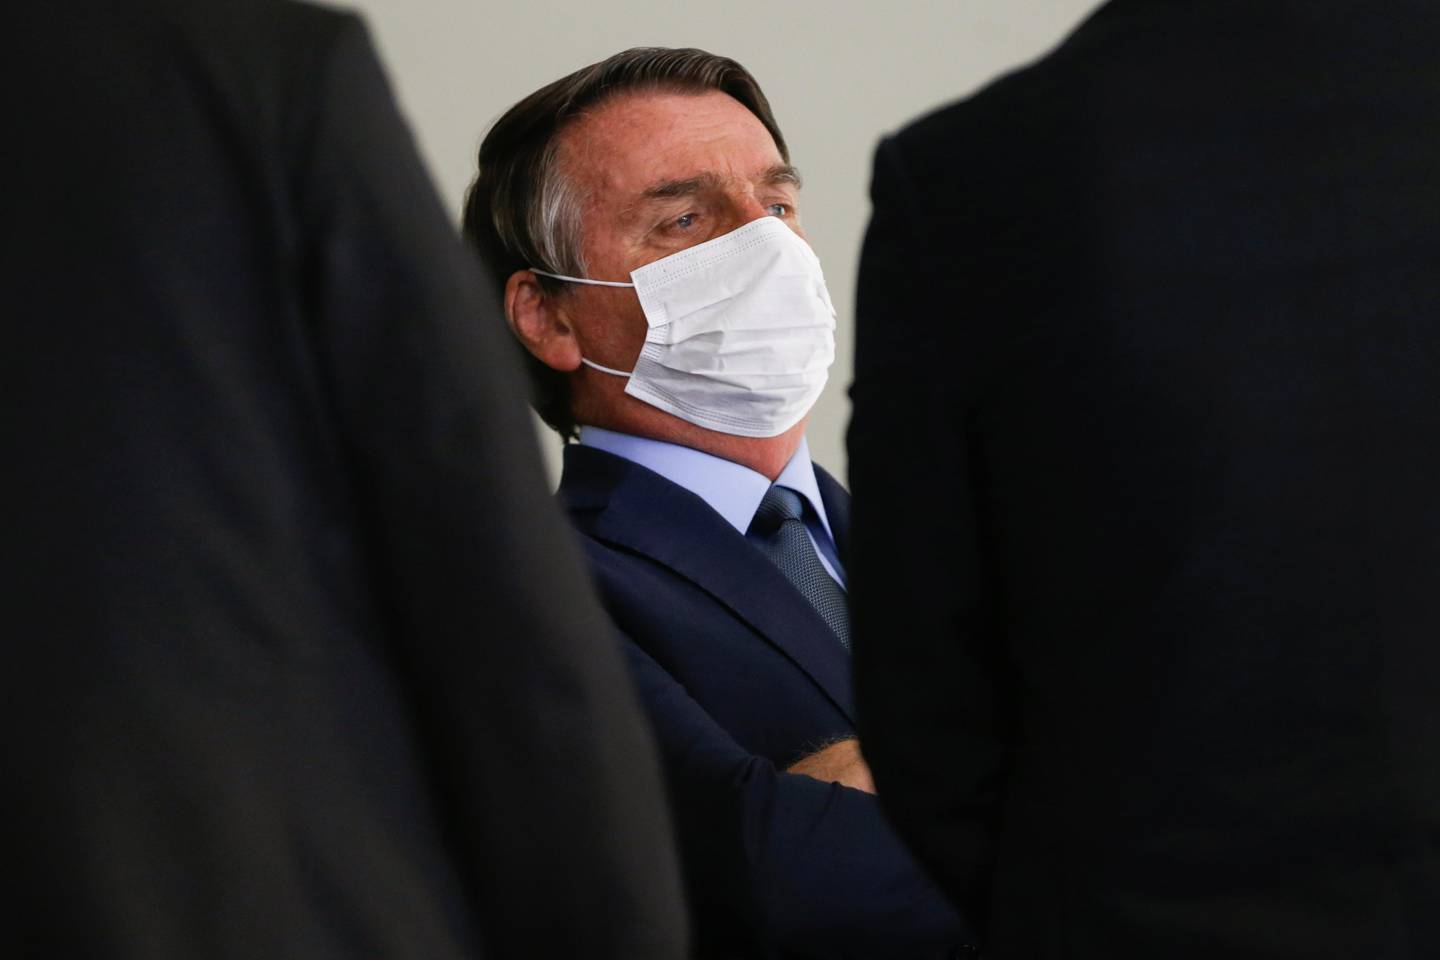 Brazil's President Jair Bolsonaro is seen before an inauguration ceremony of the new Health Minister Eduardo Pazuello (not pictured) at the Planalto Palace in Brasilia, Brazil, September 16, 2020. REUTERS/Adriano Machado